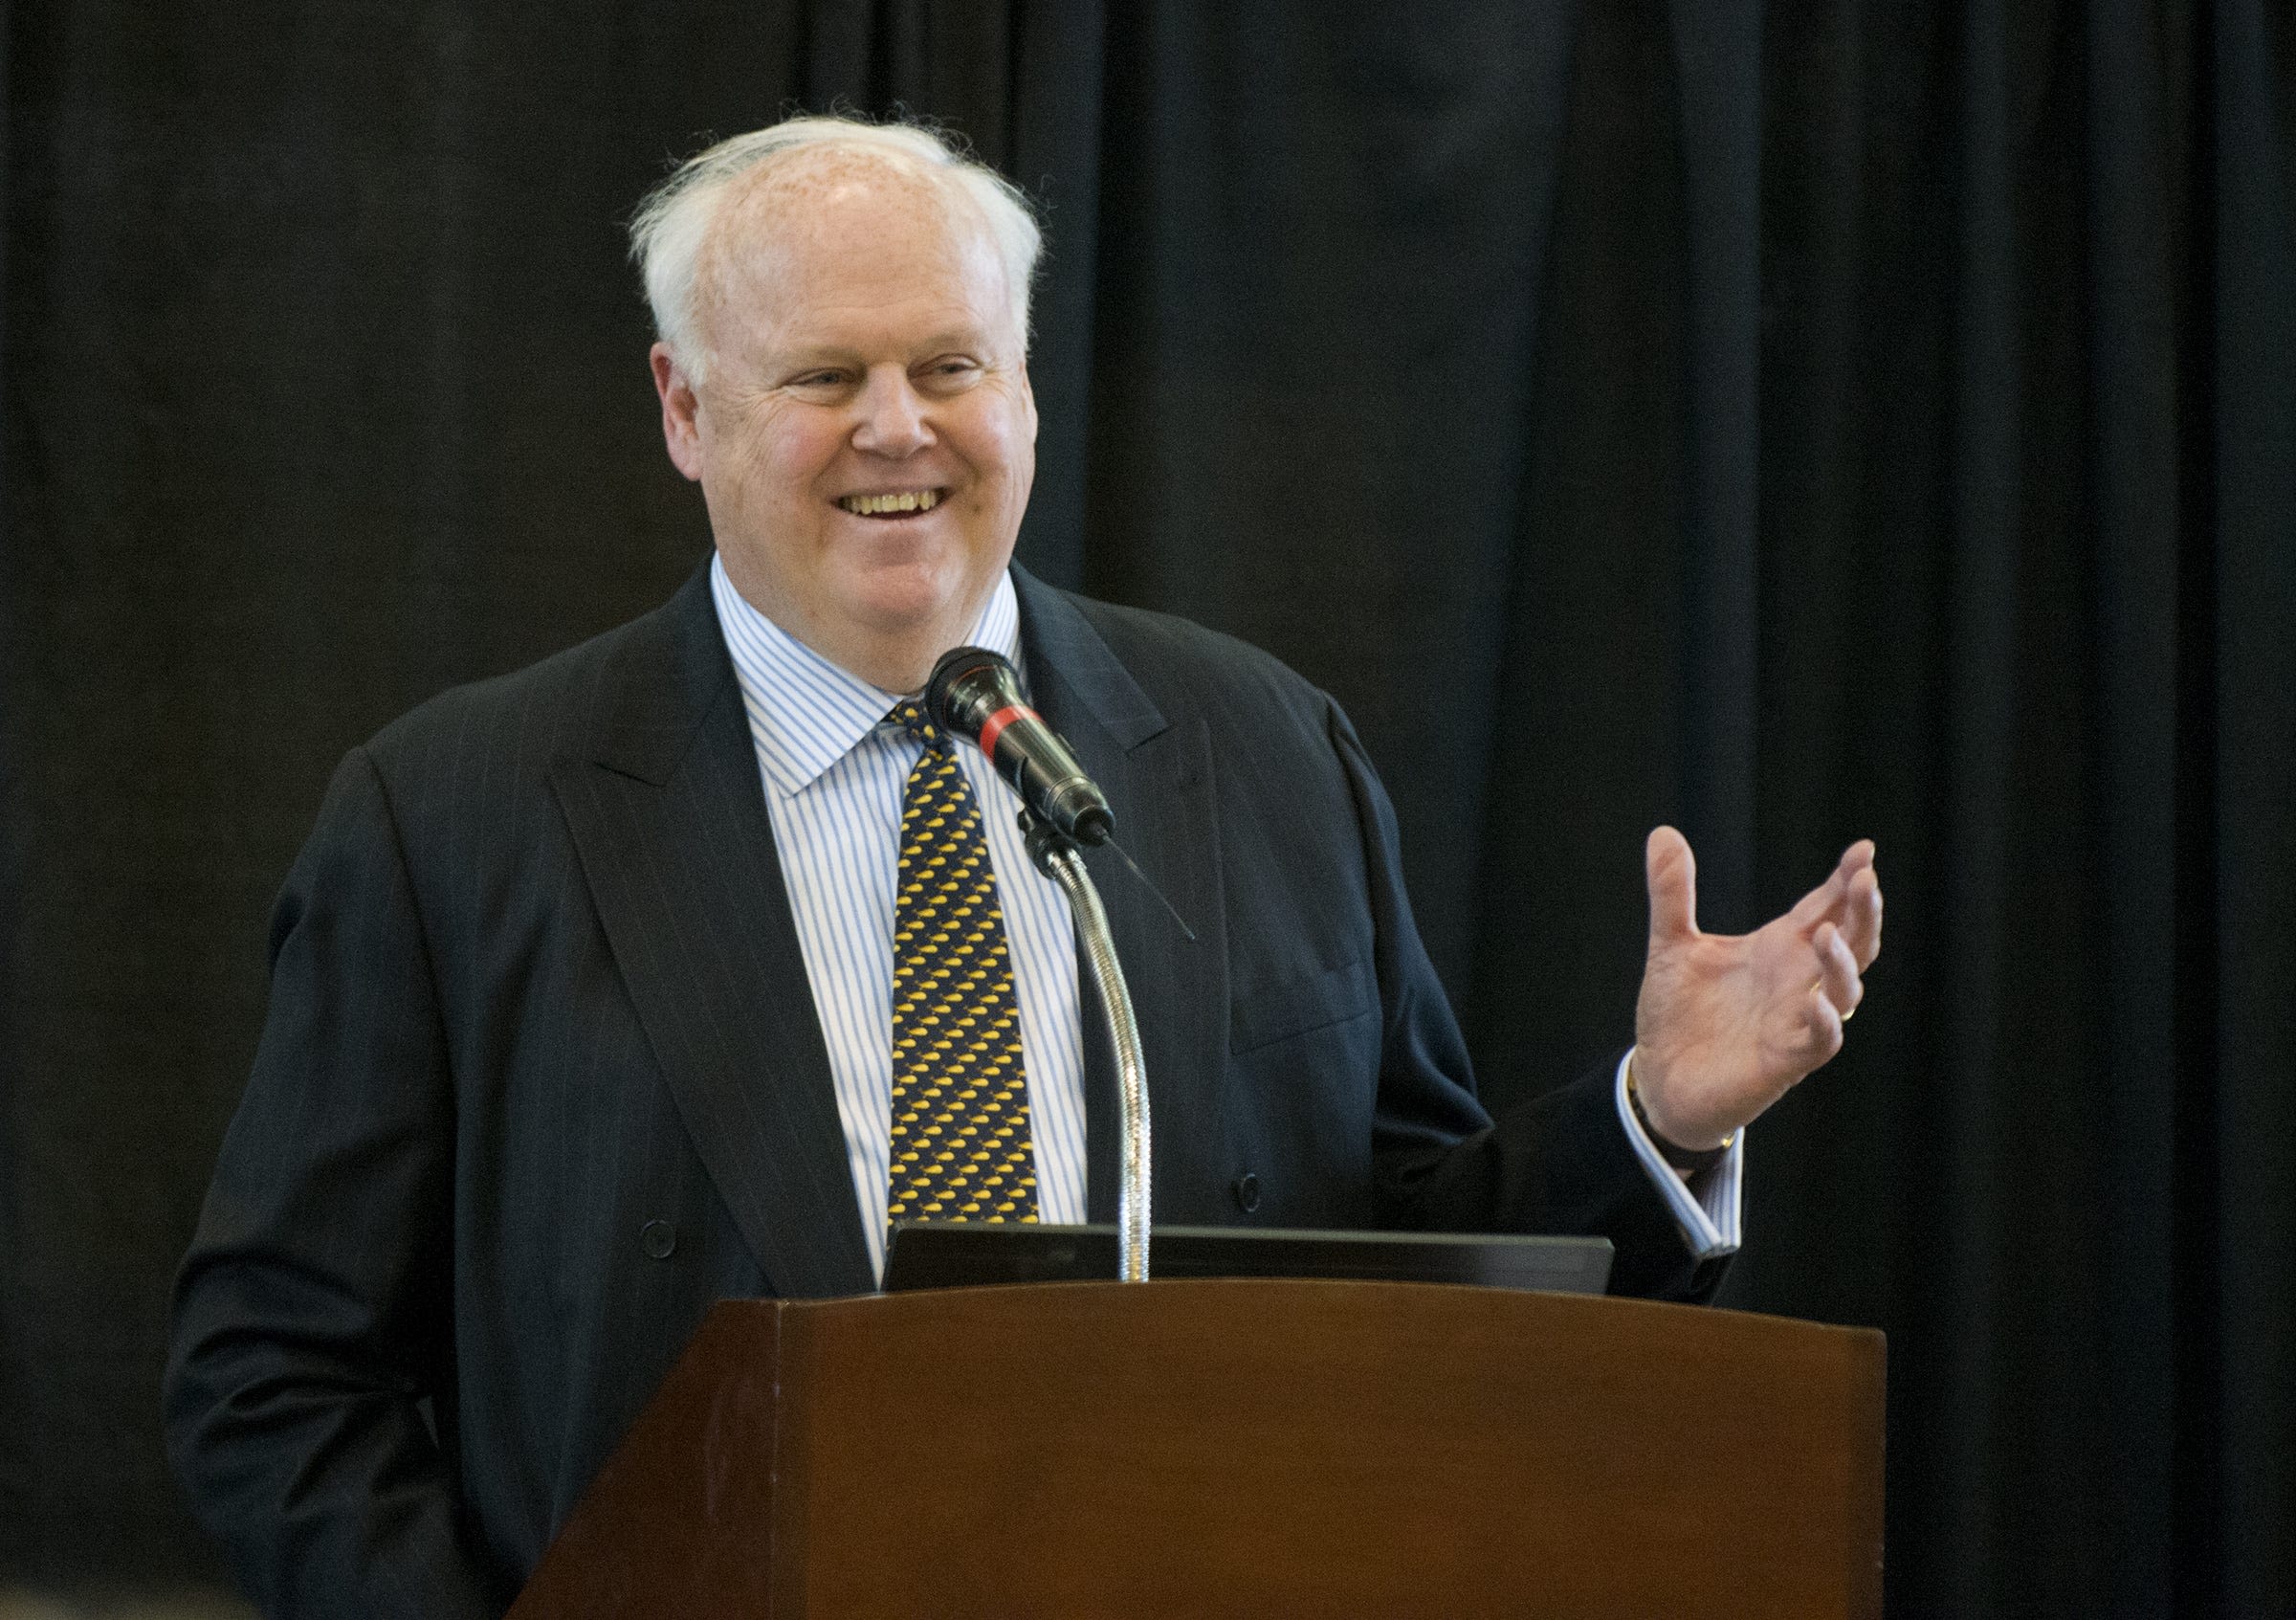 Pacers, civic leader Jim Morris dies: 'No one loved Indiana & Indianapolis more than Jim'